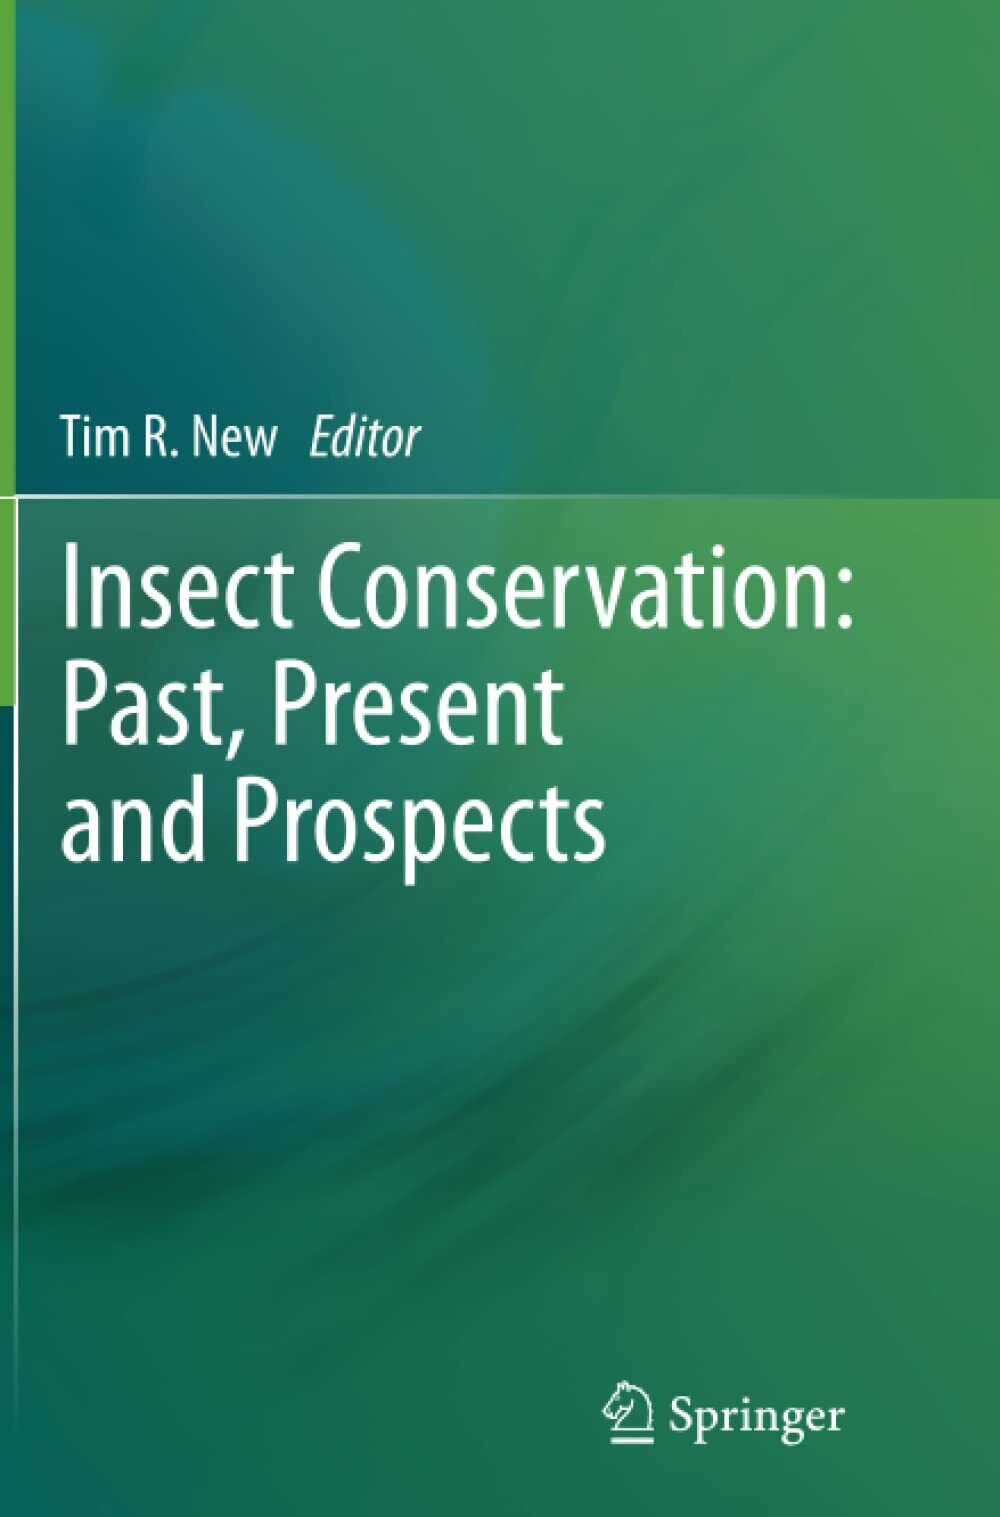 Insect Conservation: Past, Present and Prospects - Tim R. New - Springer, 2014 libro usato